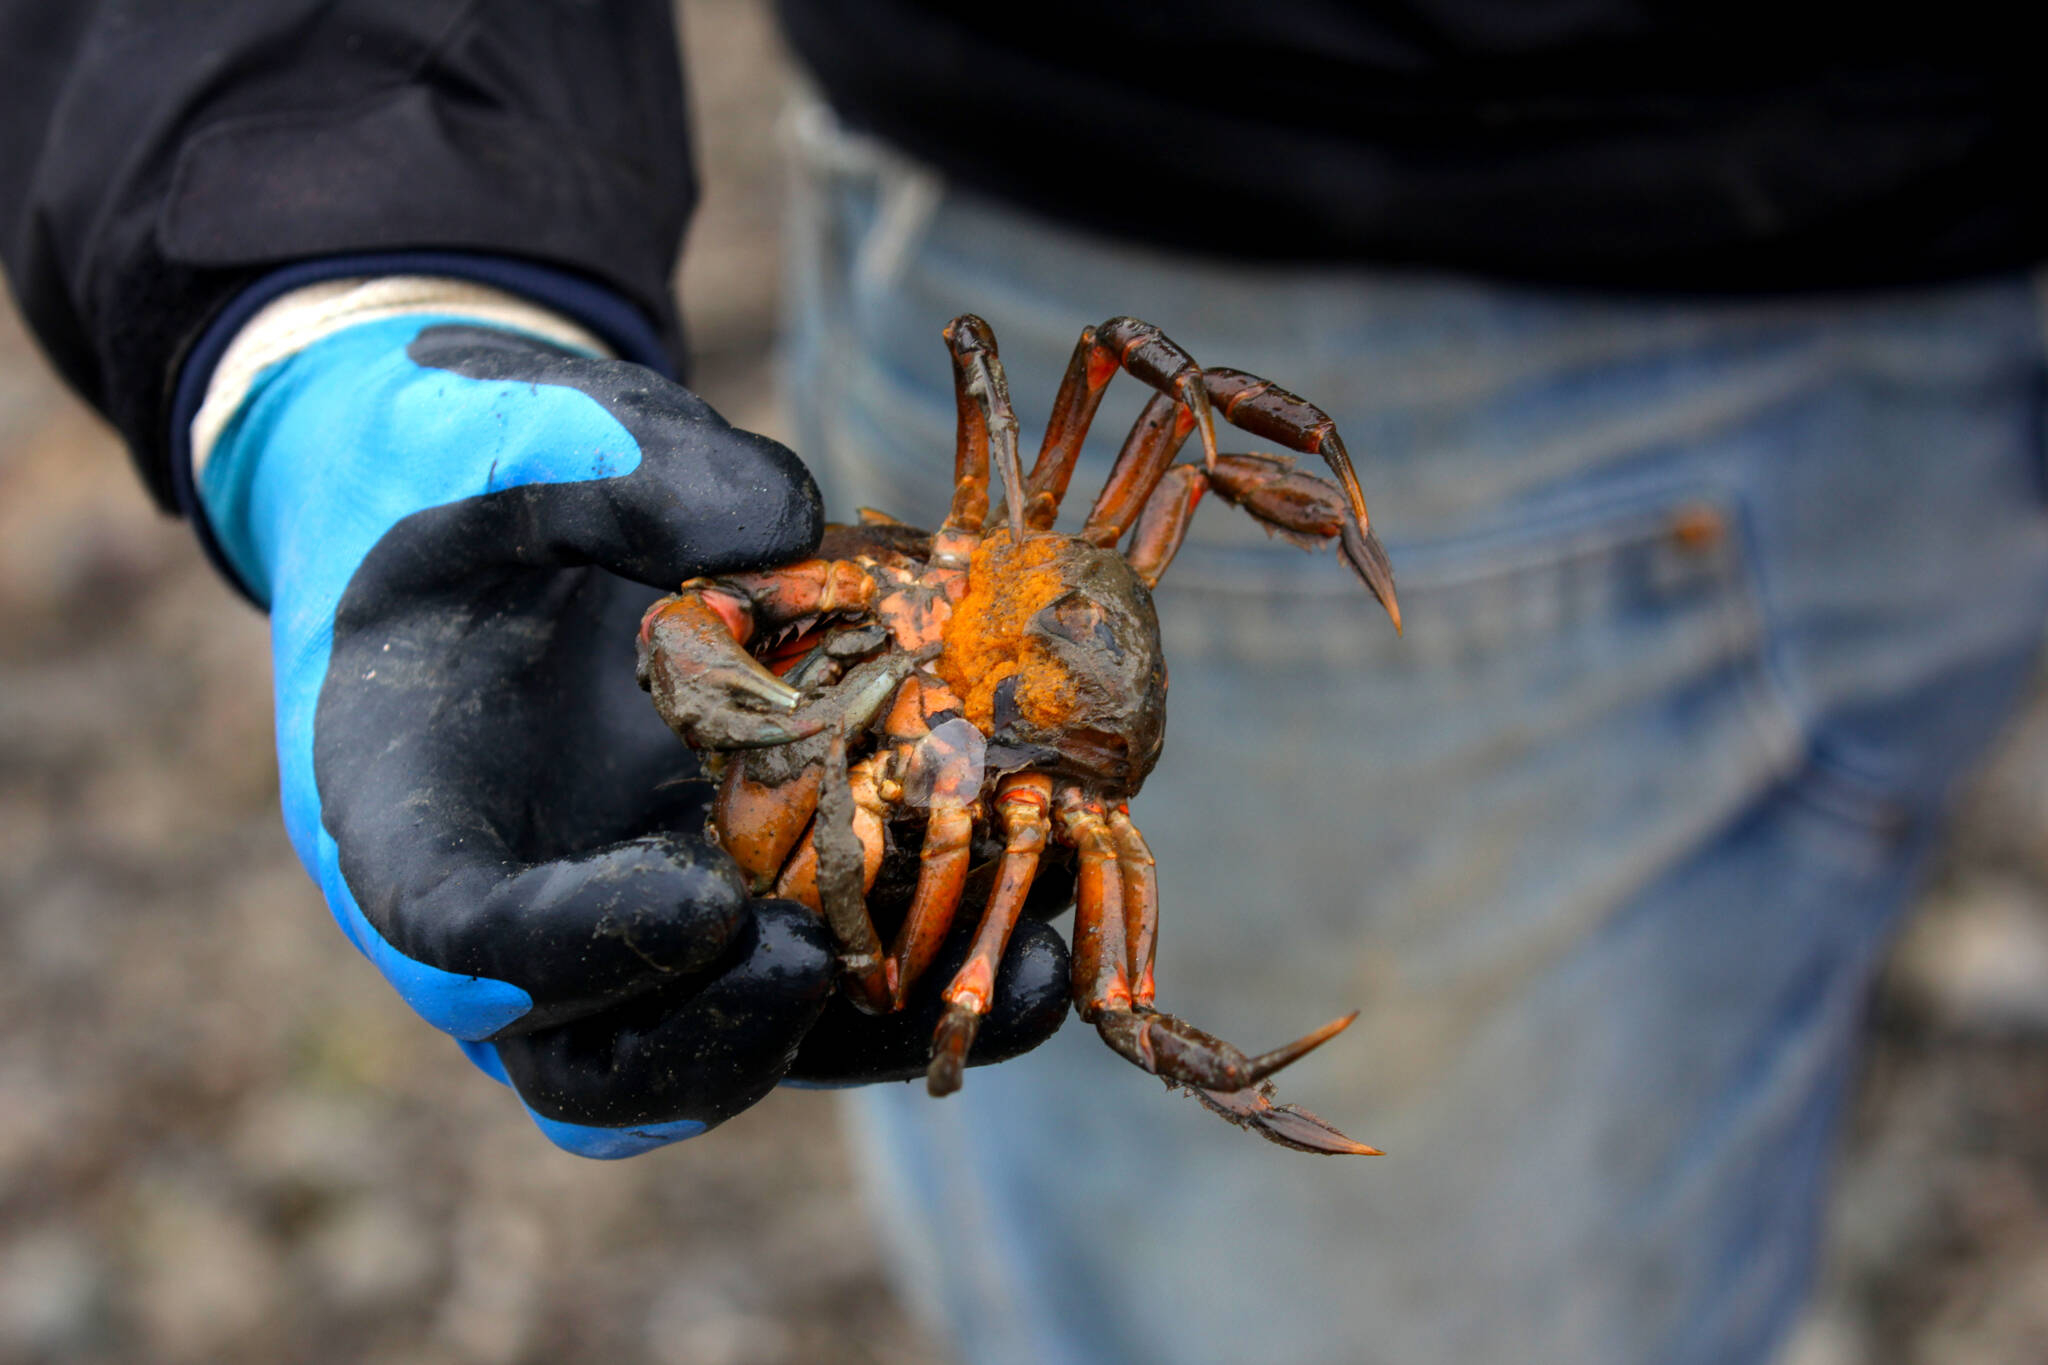 MIchael S. Lockett / The Daily World
A member of the Shoalwater Bay Indian Tribe’s Department of Natural Resources holds a gravid European green crab, showing its egg mass, as it gets counted and removed on Jan. 26.